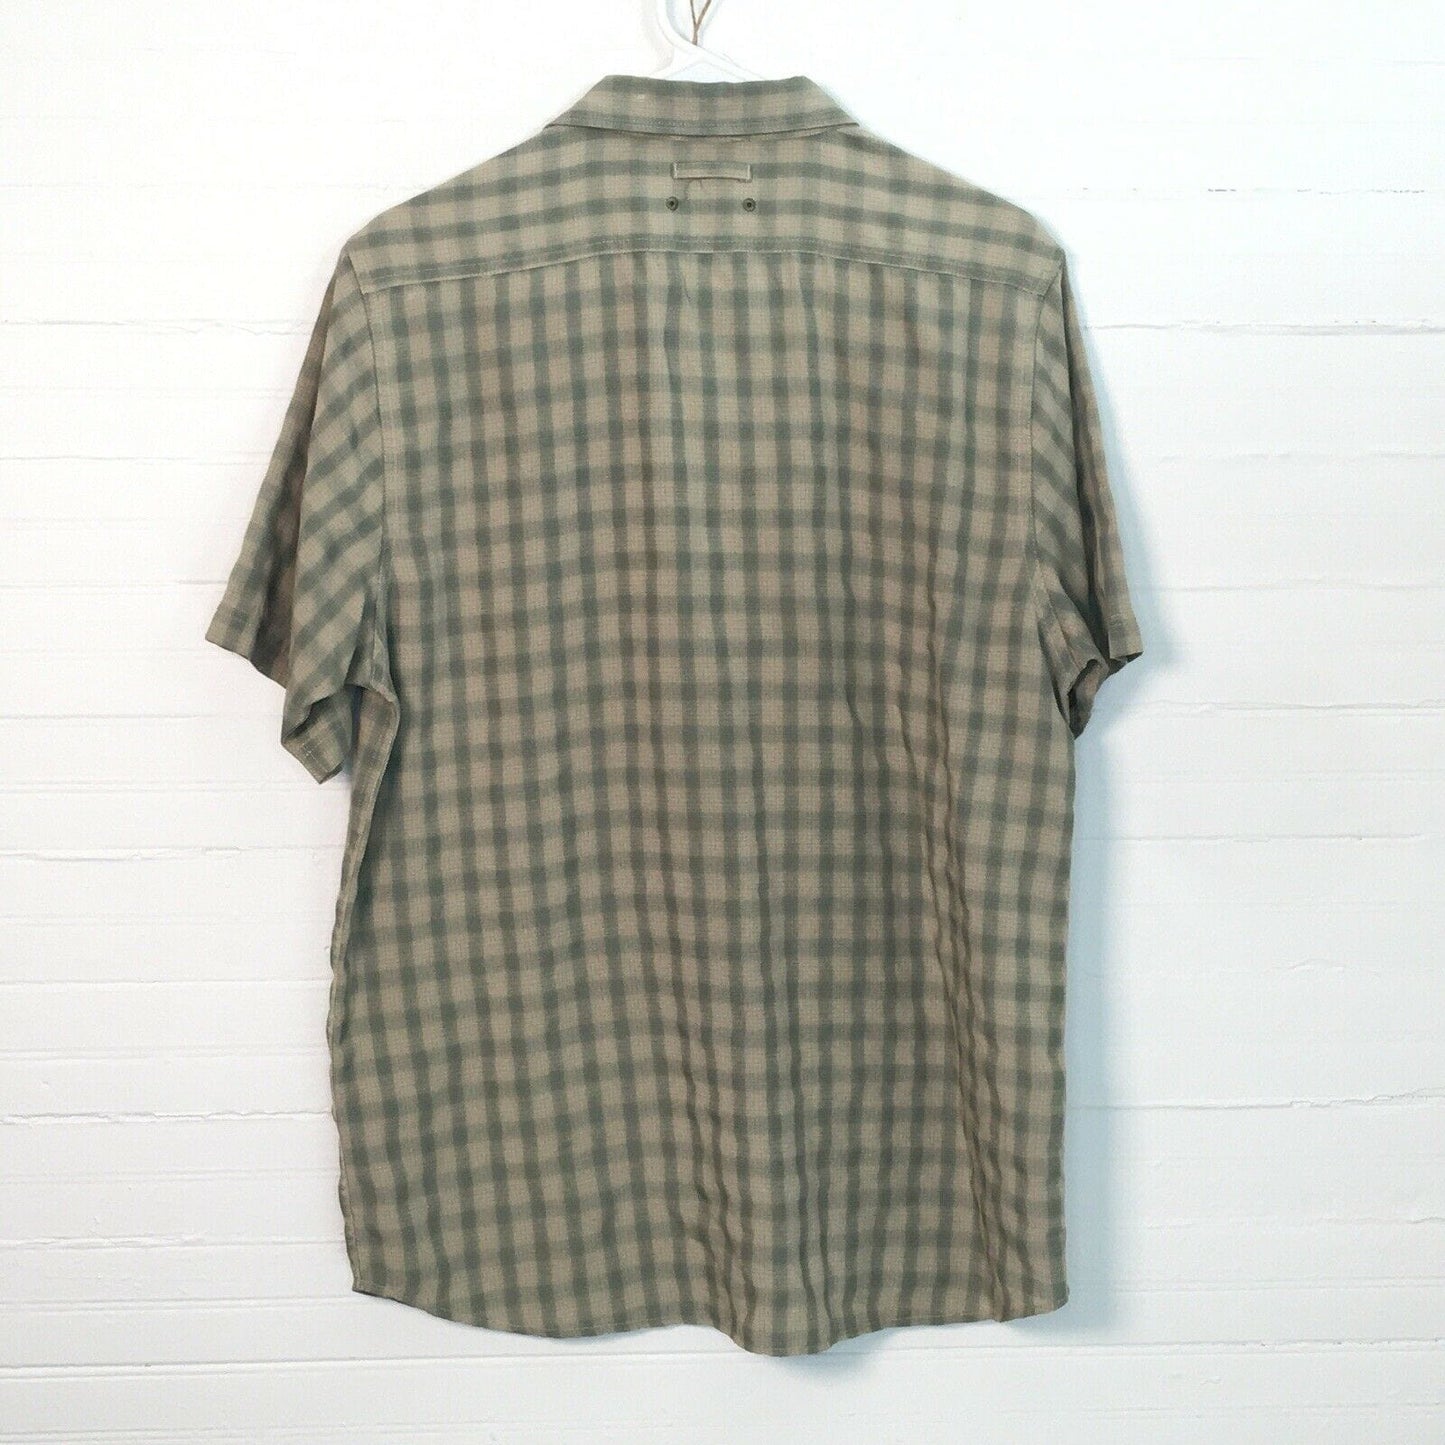 North Face Mens Short Sleeve Button Up Shirt, Brown Green Plaid - M - Vented